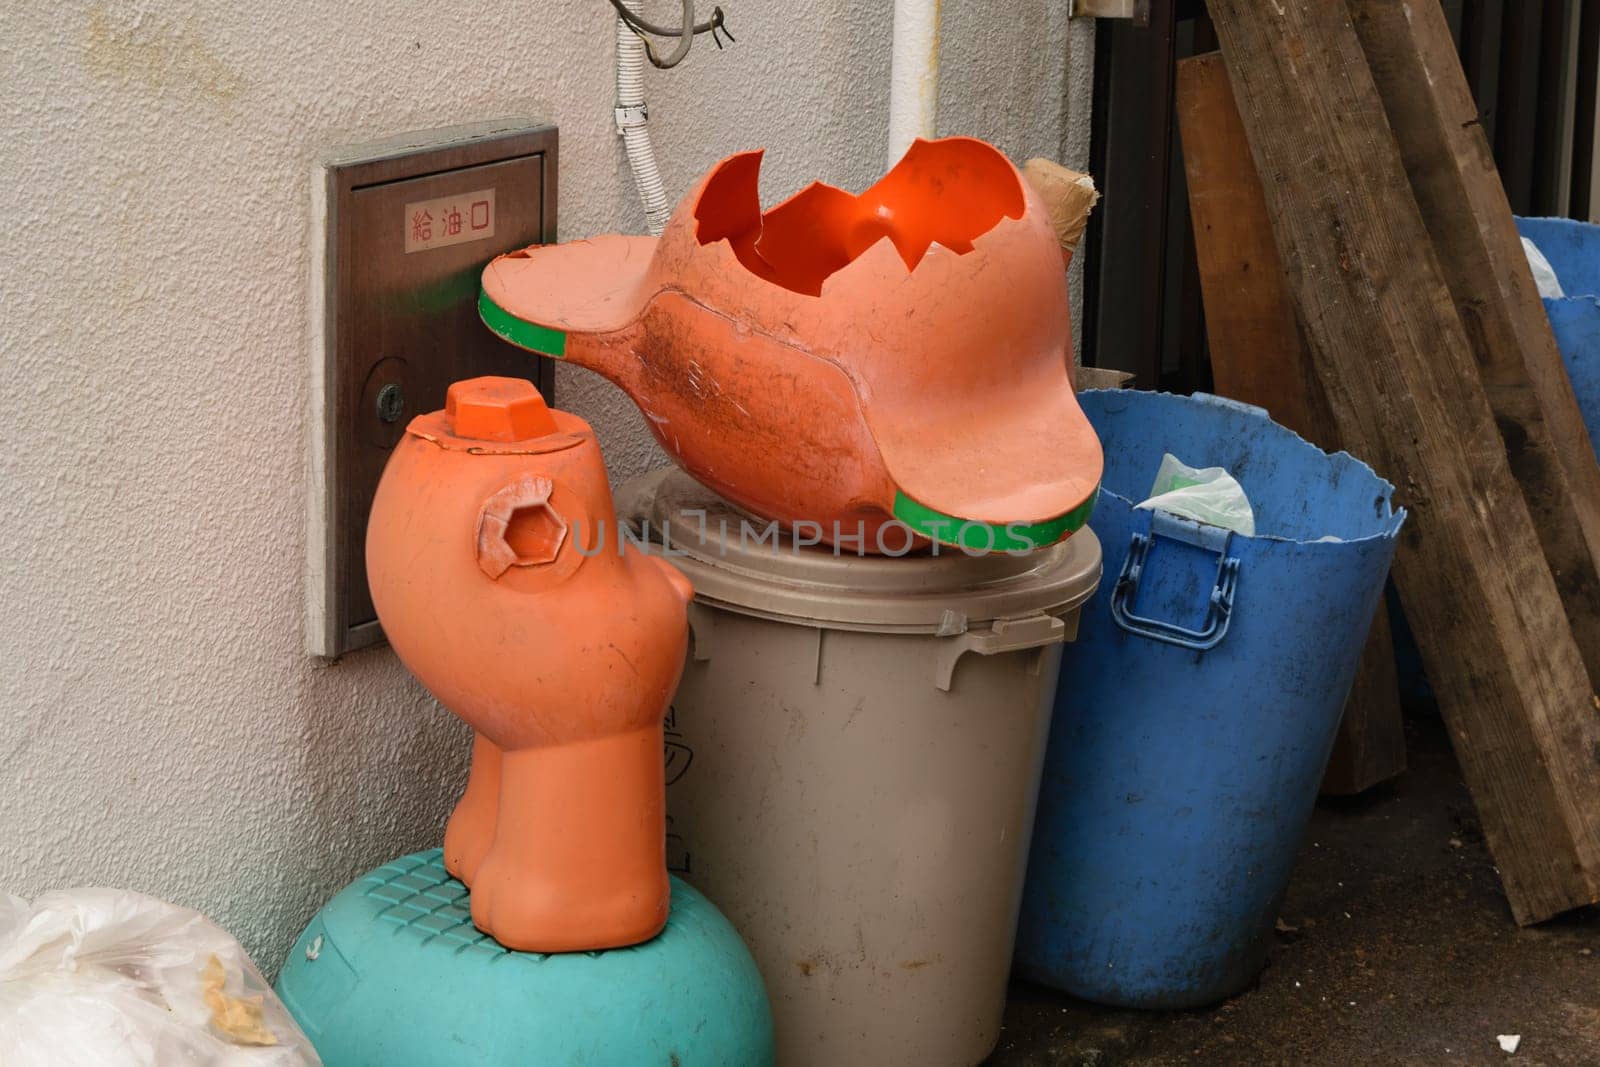 A broken plastic statue pots on a trash bin with other waste containers nearby, depicting waste and recycling.